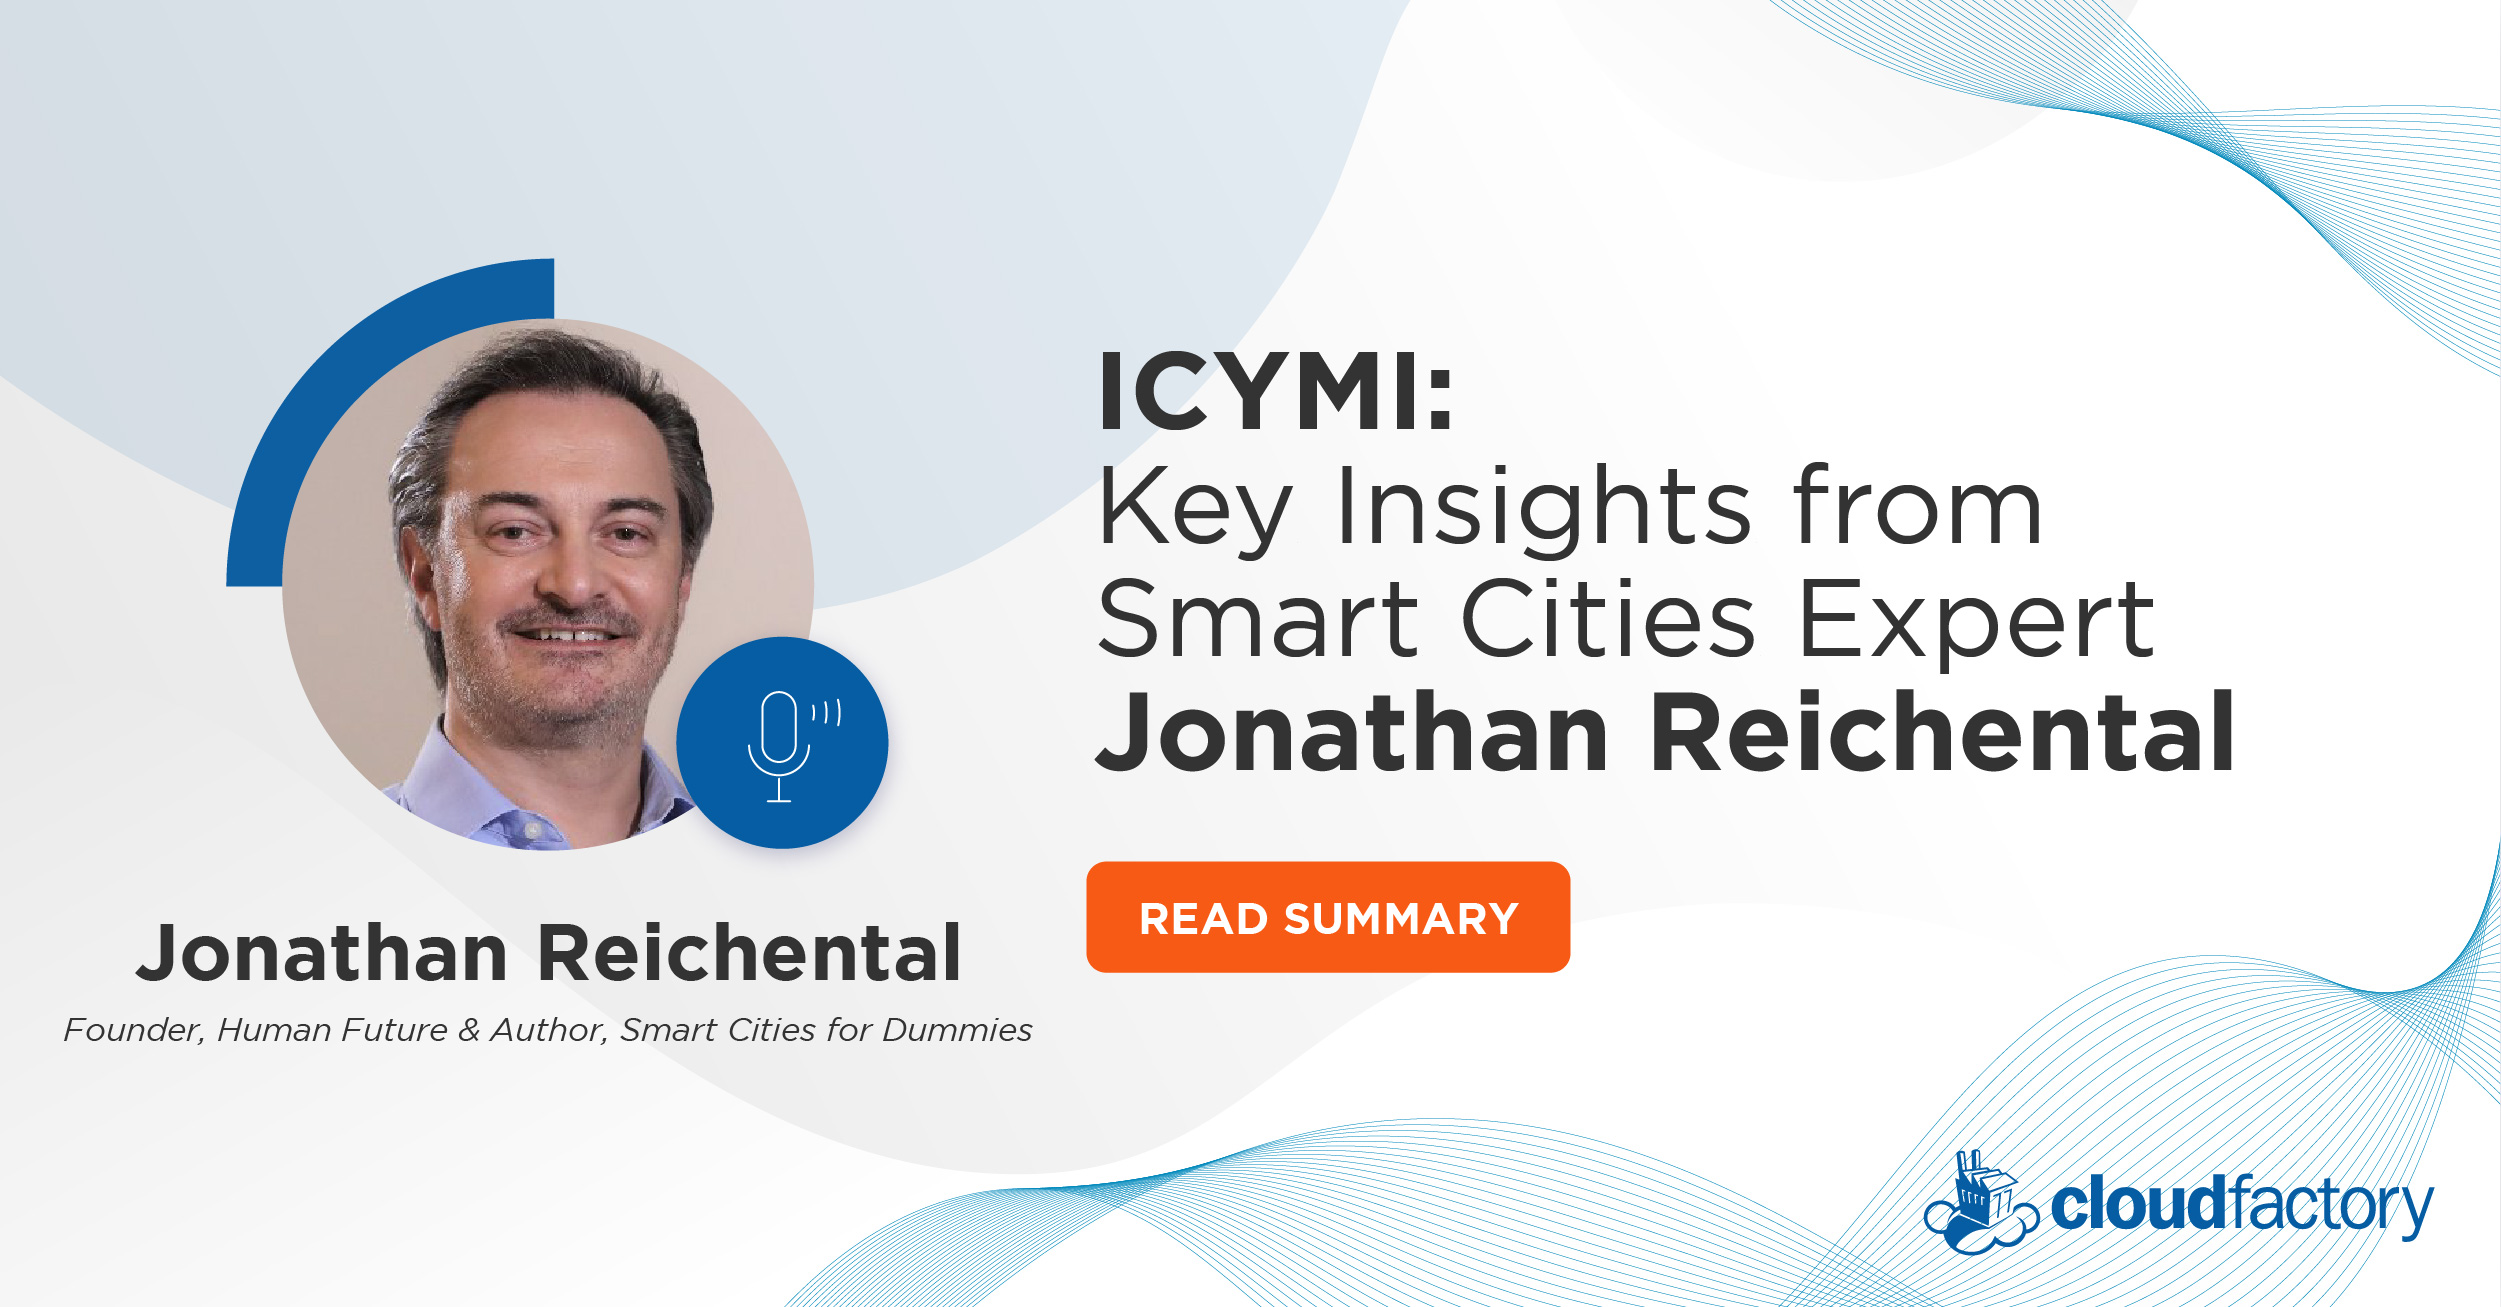 ICYMI: Key Insights from Smart Cities Expert Jonathan Reichental